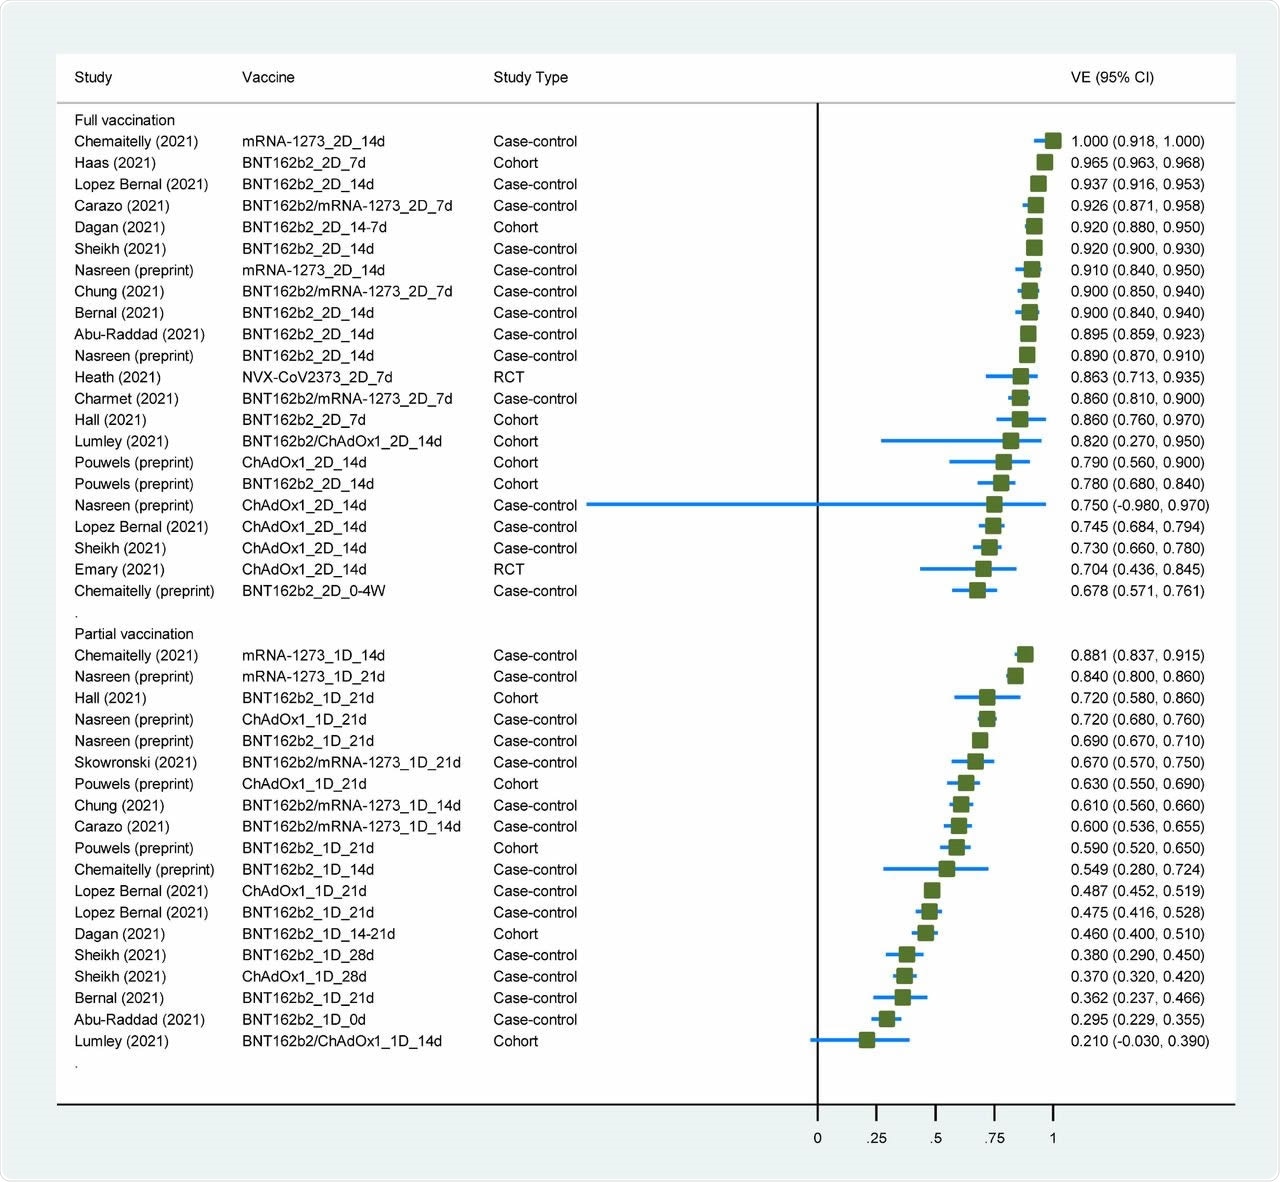 Forest plot showing vaccine effectiveness of COVID-19 vaccines against Alpah variant. Abbreviations: VE, vaccine effectiveness; CI, confidence interval; RCT, randomized controlled trial.